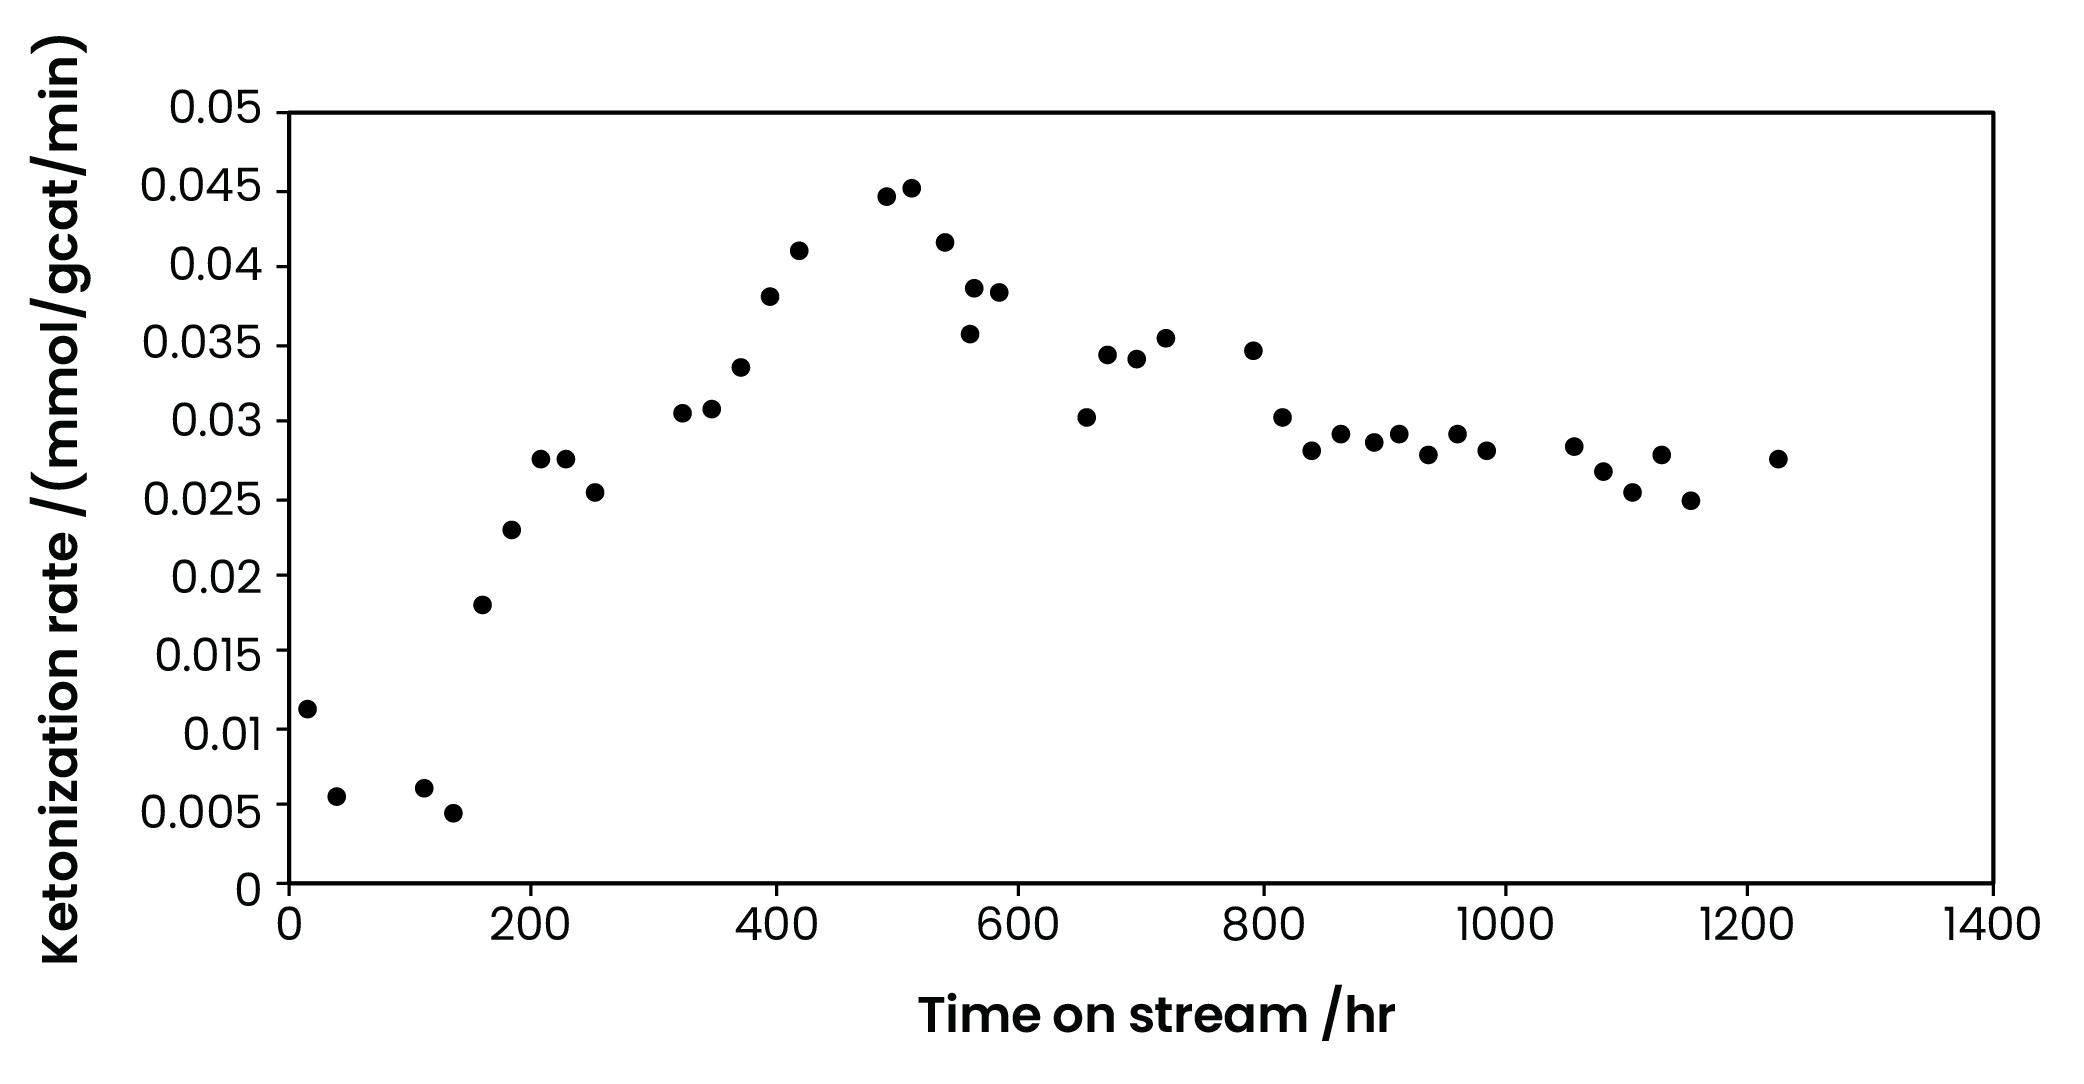 A dot chart with ketonization rate (mmol/gcat/min) as the Y axis and time on stream/hr as the x axis. Results show ketonization rates ranging from 0.005 to around 0.045, running from 0 to over 1,200 hours.